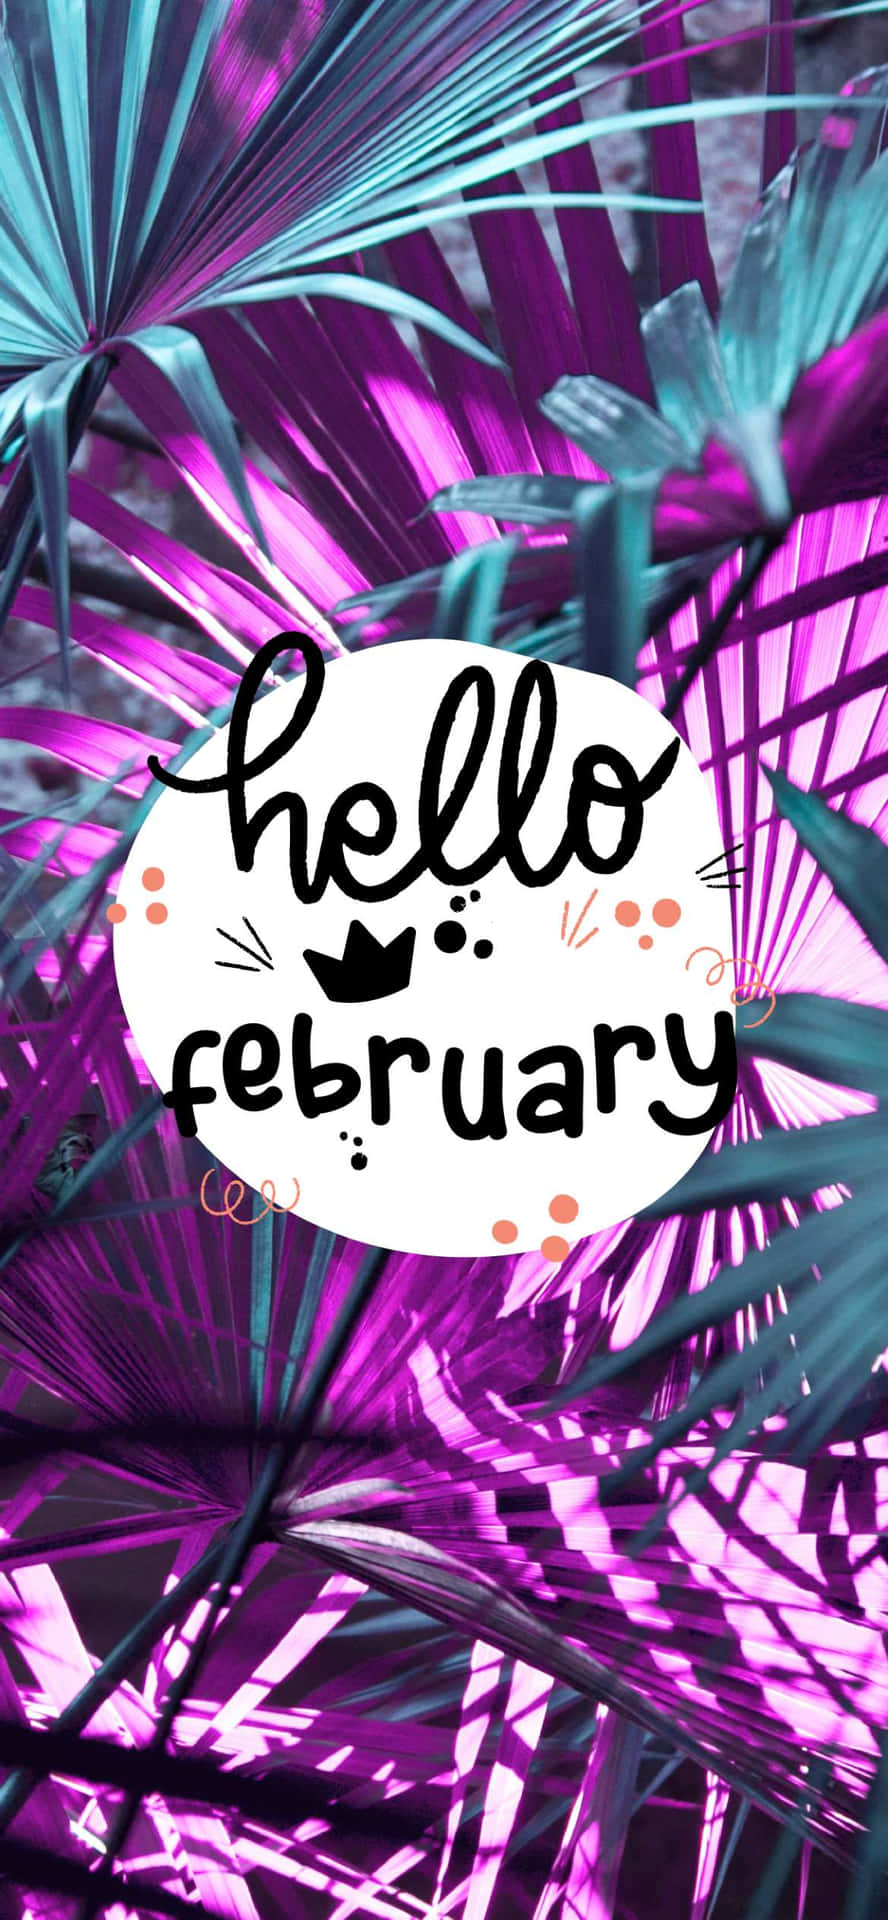 Welcome to February, the month of love, cheer and warmth! Wallpaper